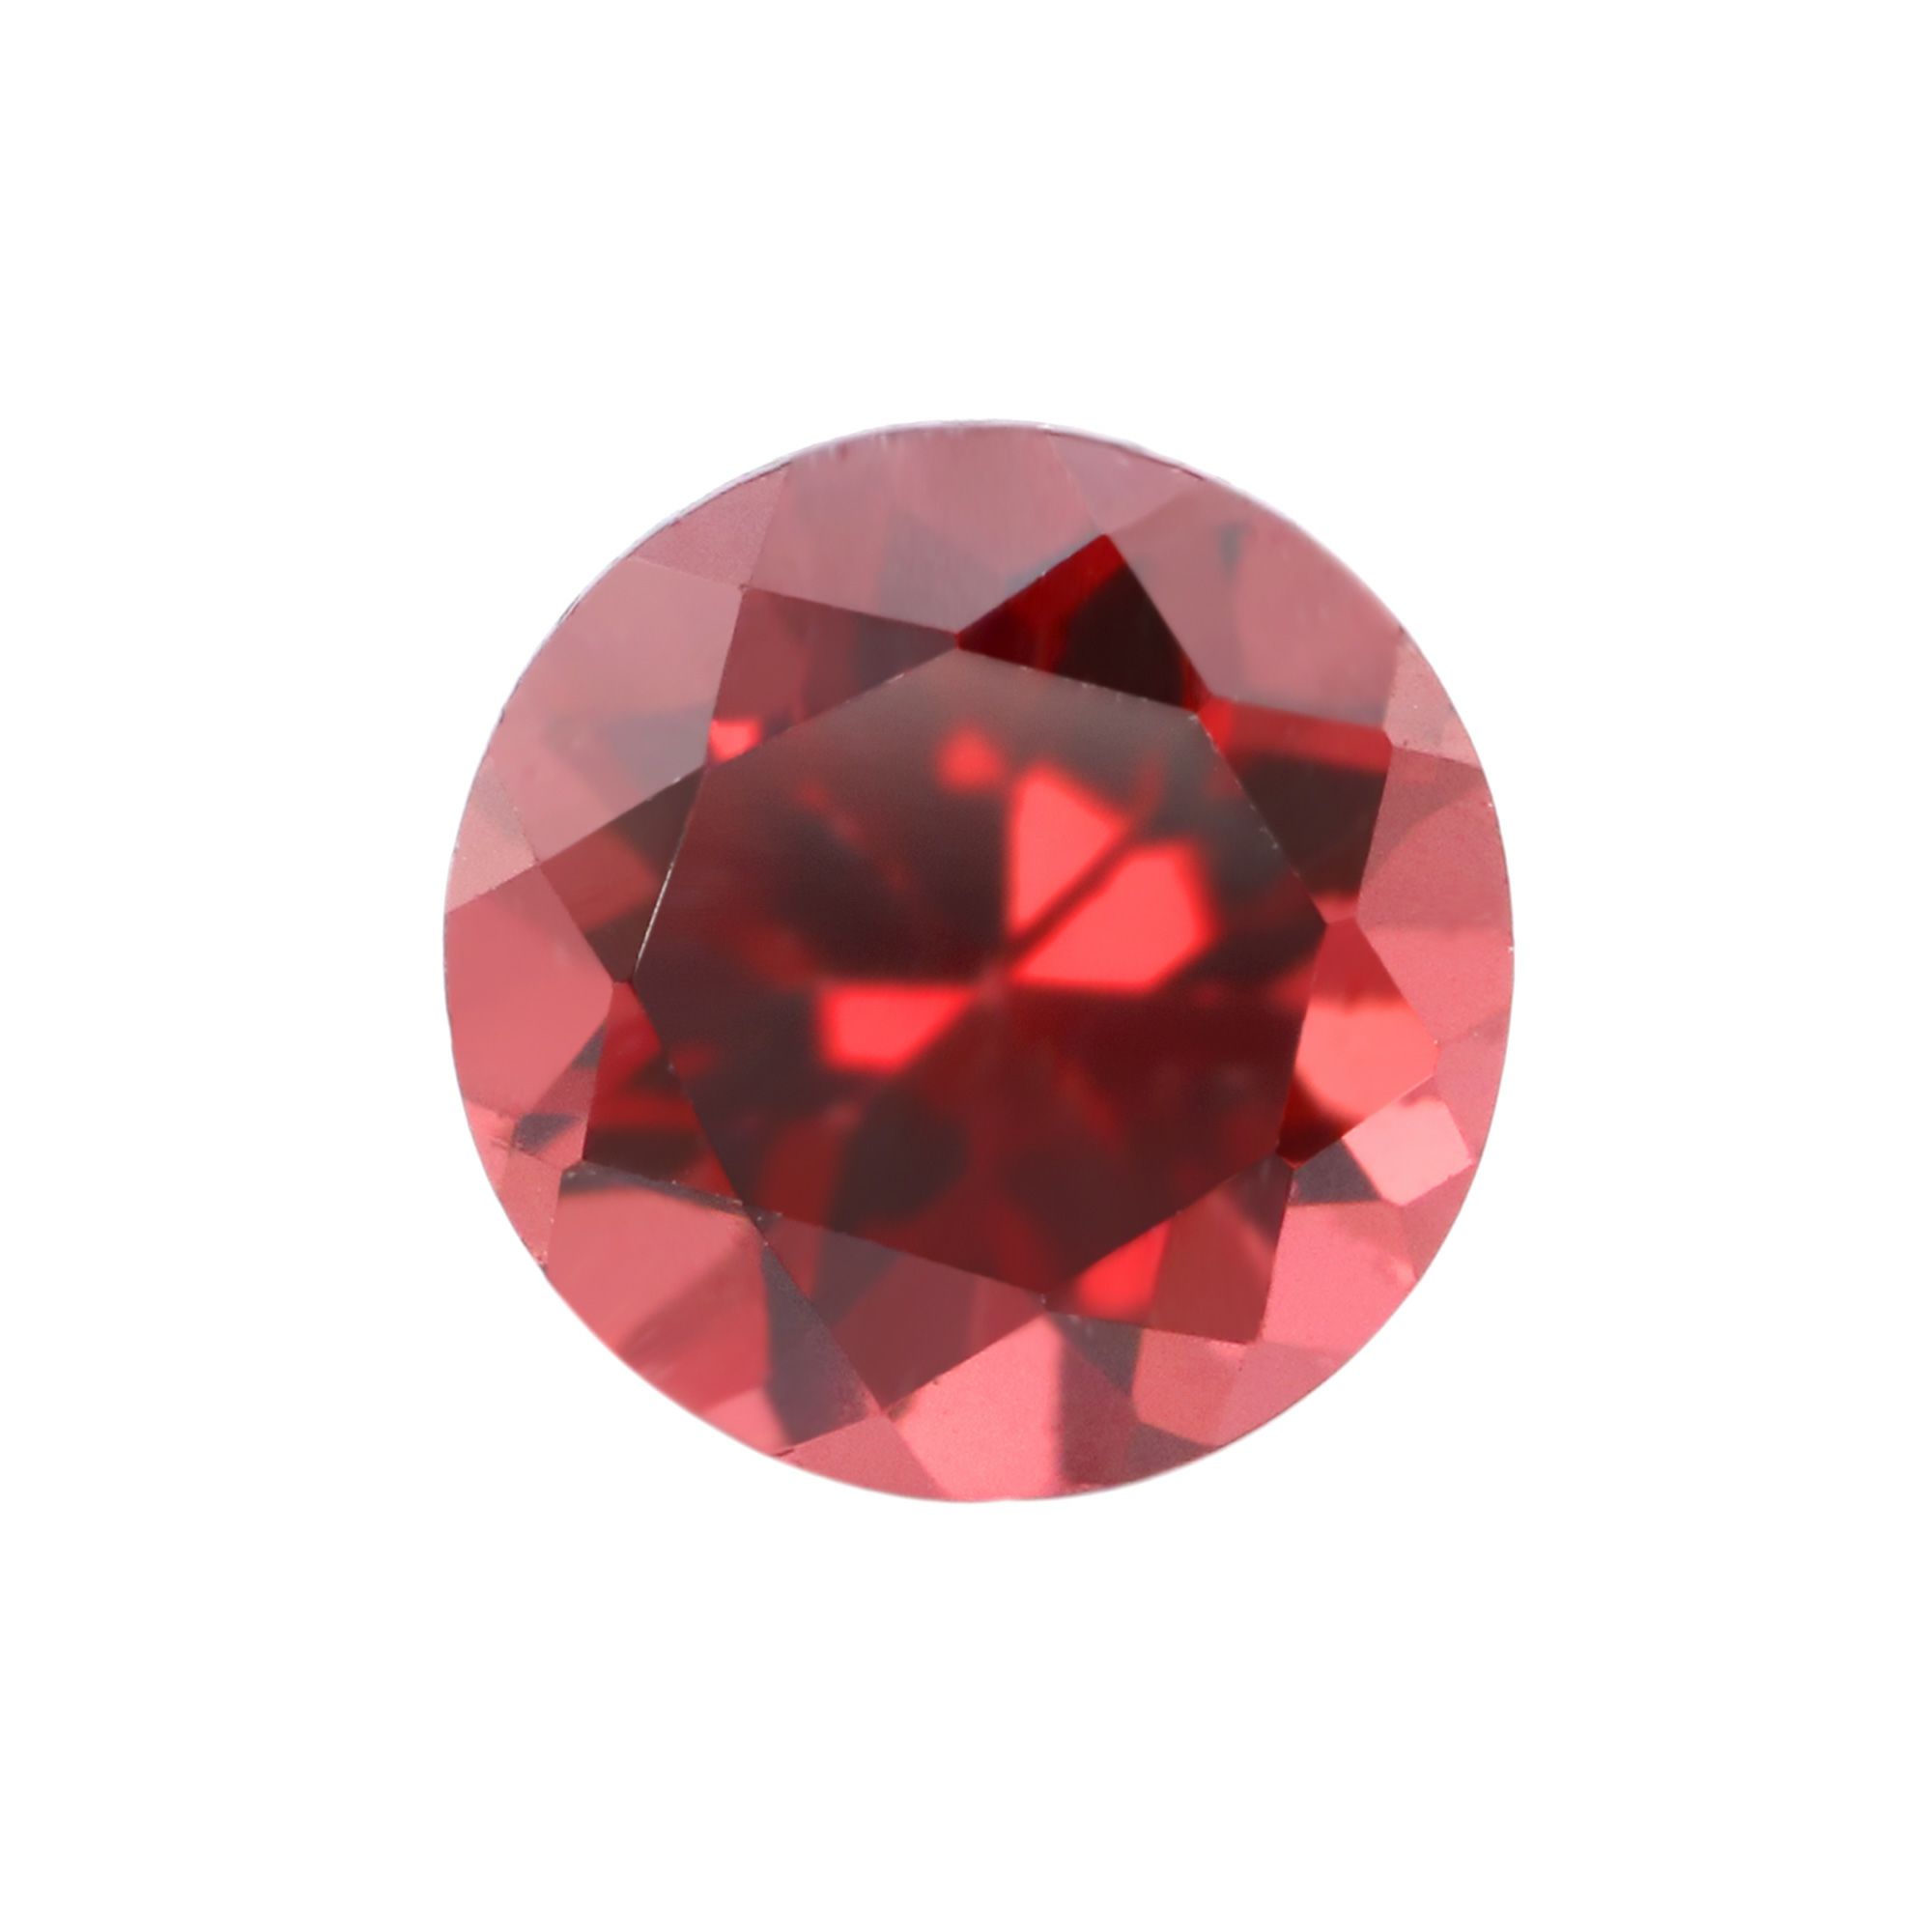 5Pcs Round Red Garnet January Birthstone Faceted Cut Loose Gemstone Nature Semi Precious Stone DIY Jewelry Supplies 4110168 - Click Image to Close